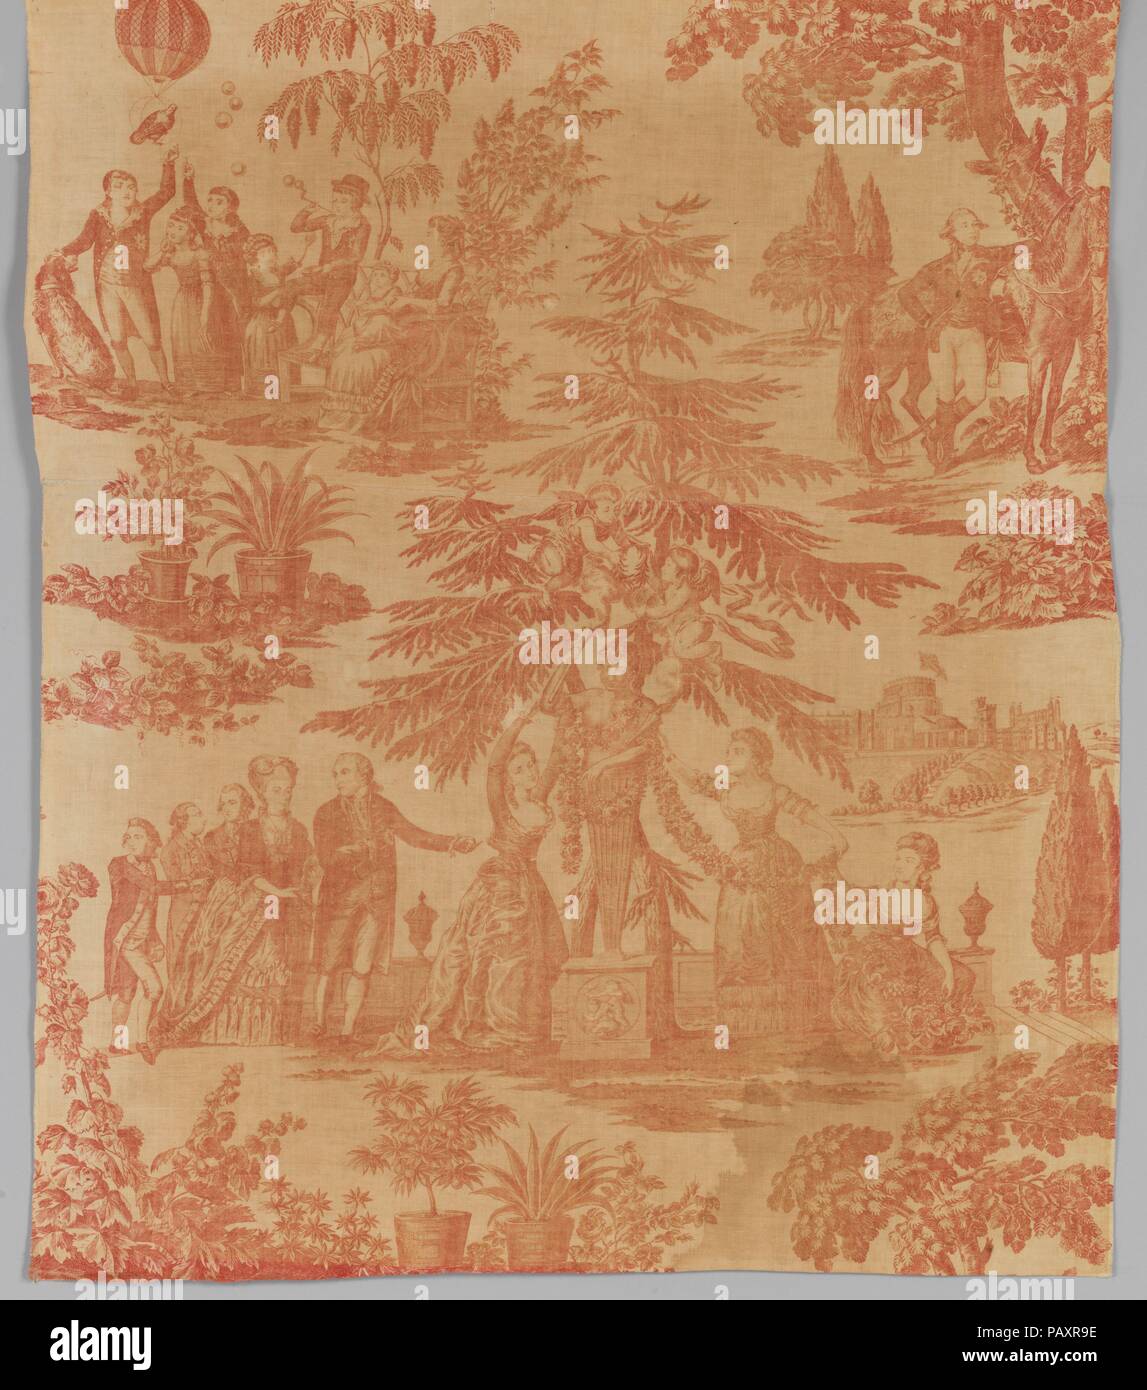 Copper plate printed cotton with King George III and his family. Artist: After engravings by J. Seymour , published London, 1779. Culture: British. Dimensions: H. 35 x W. 29 inches  88.9 x 73.7 cm. Date: ca. 1785.  The balloon in the upper left is based on the Charles and Robert's hydrogen balloon, launched December 1, 1783. The figure of the Prince of Wales is from an engraving by J.R. Smith, 1783, after a painting by Gainsborough. The group of the three princesses is adapted from an engraving by Thomas Watson, 1776, from the painting of 'the three Montgomery sisters decorating a terminal fig Stock Photo